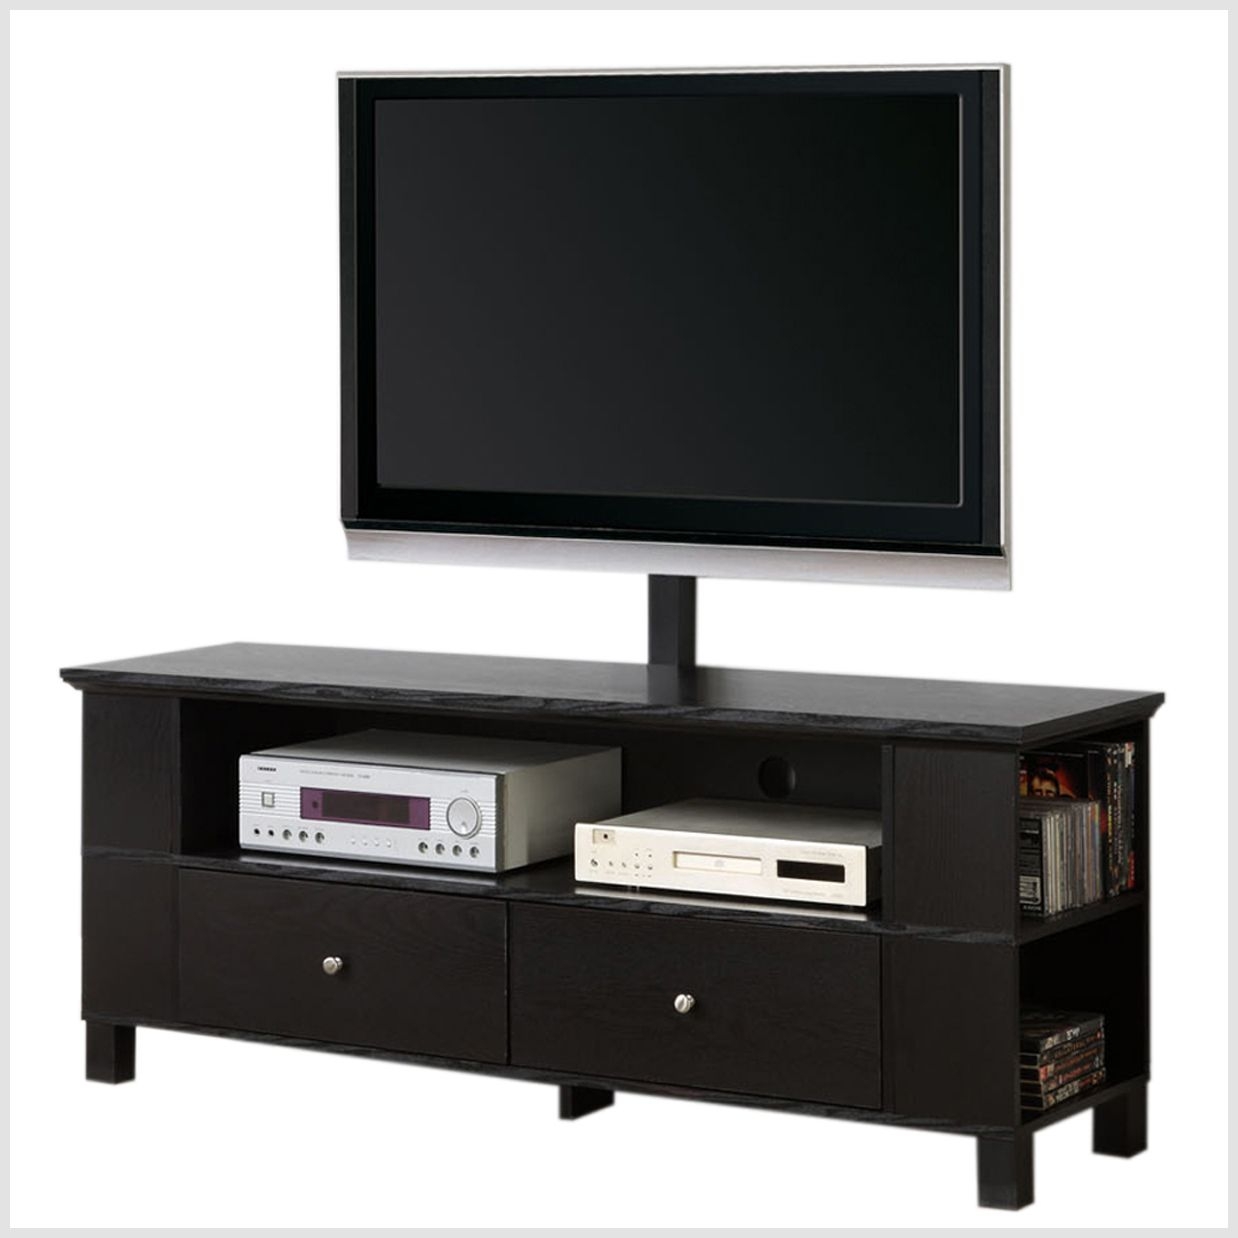 Black Wood Tv Stand With Multi Purpose Storage And Mount For Tvs Up To 65